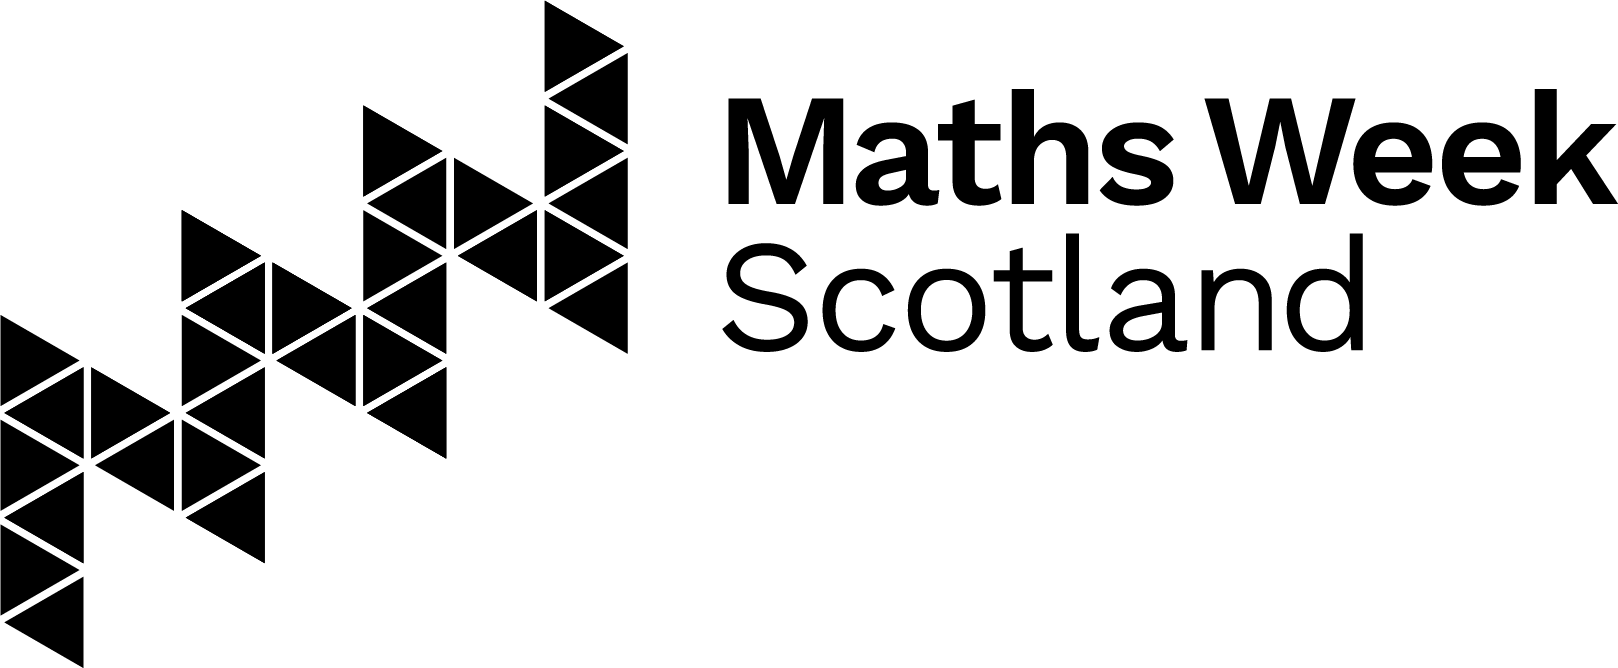 Logo saying "Maths Week Scotland" in black font and on a white background